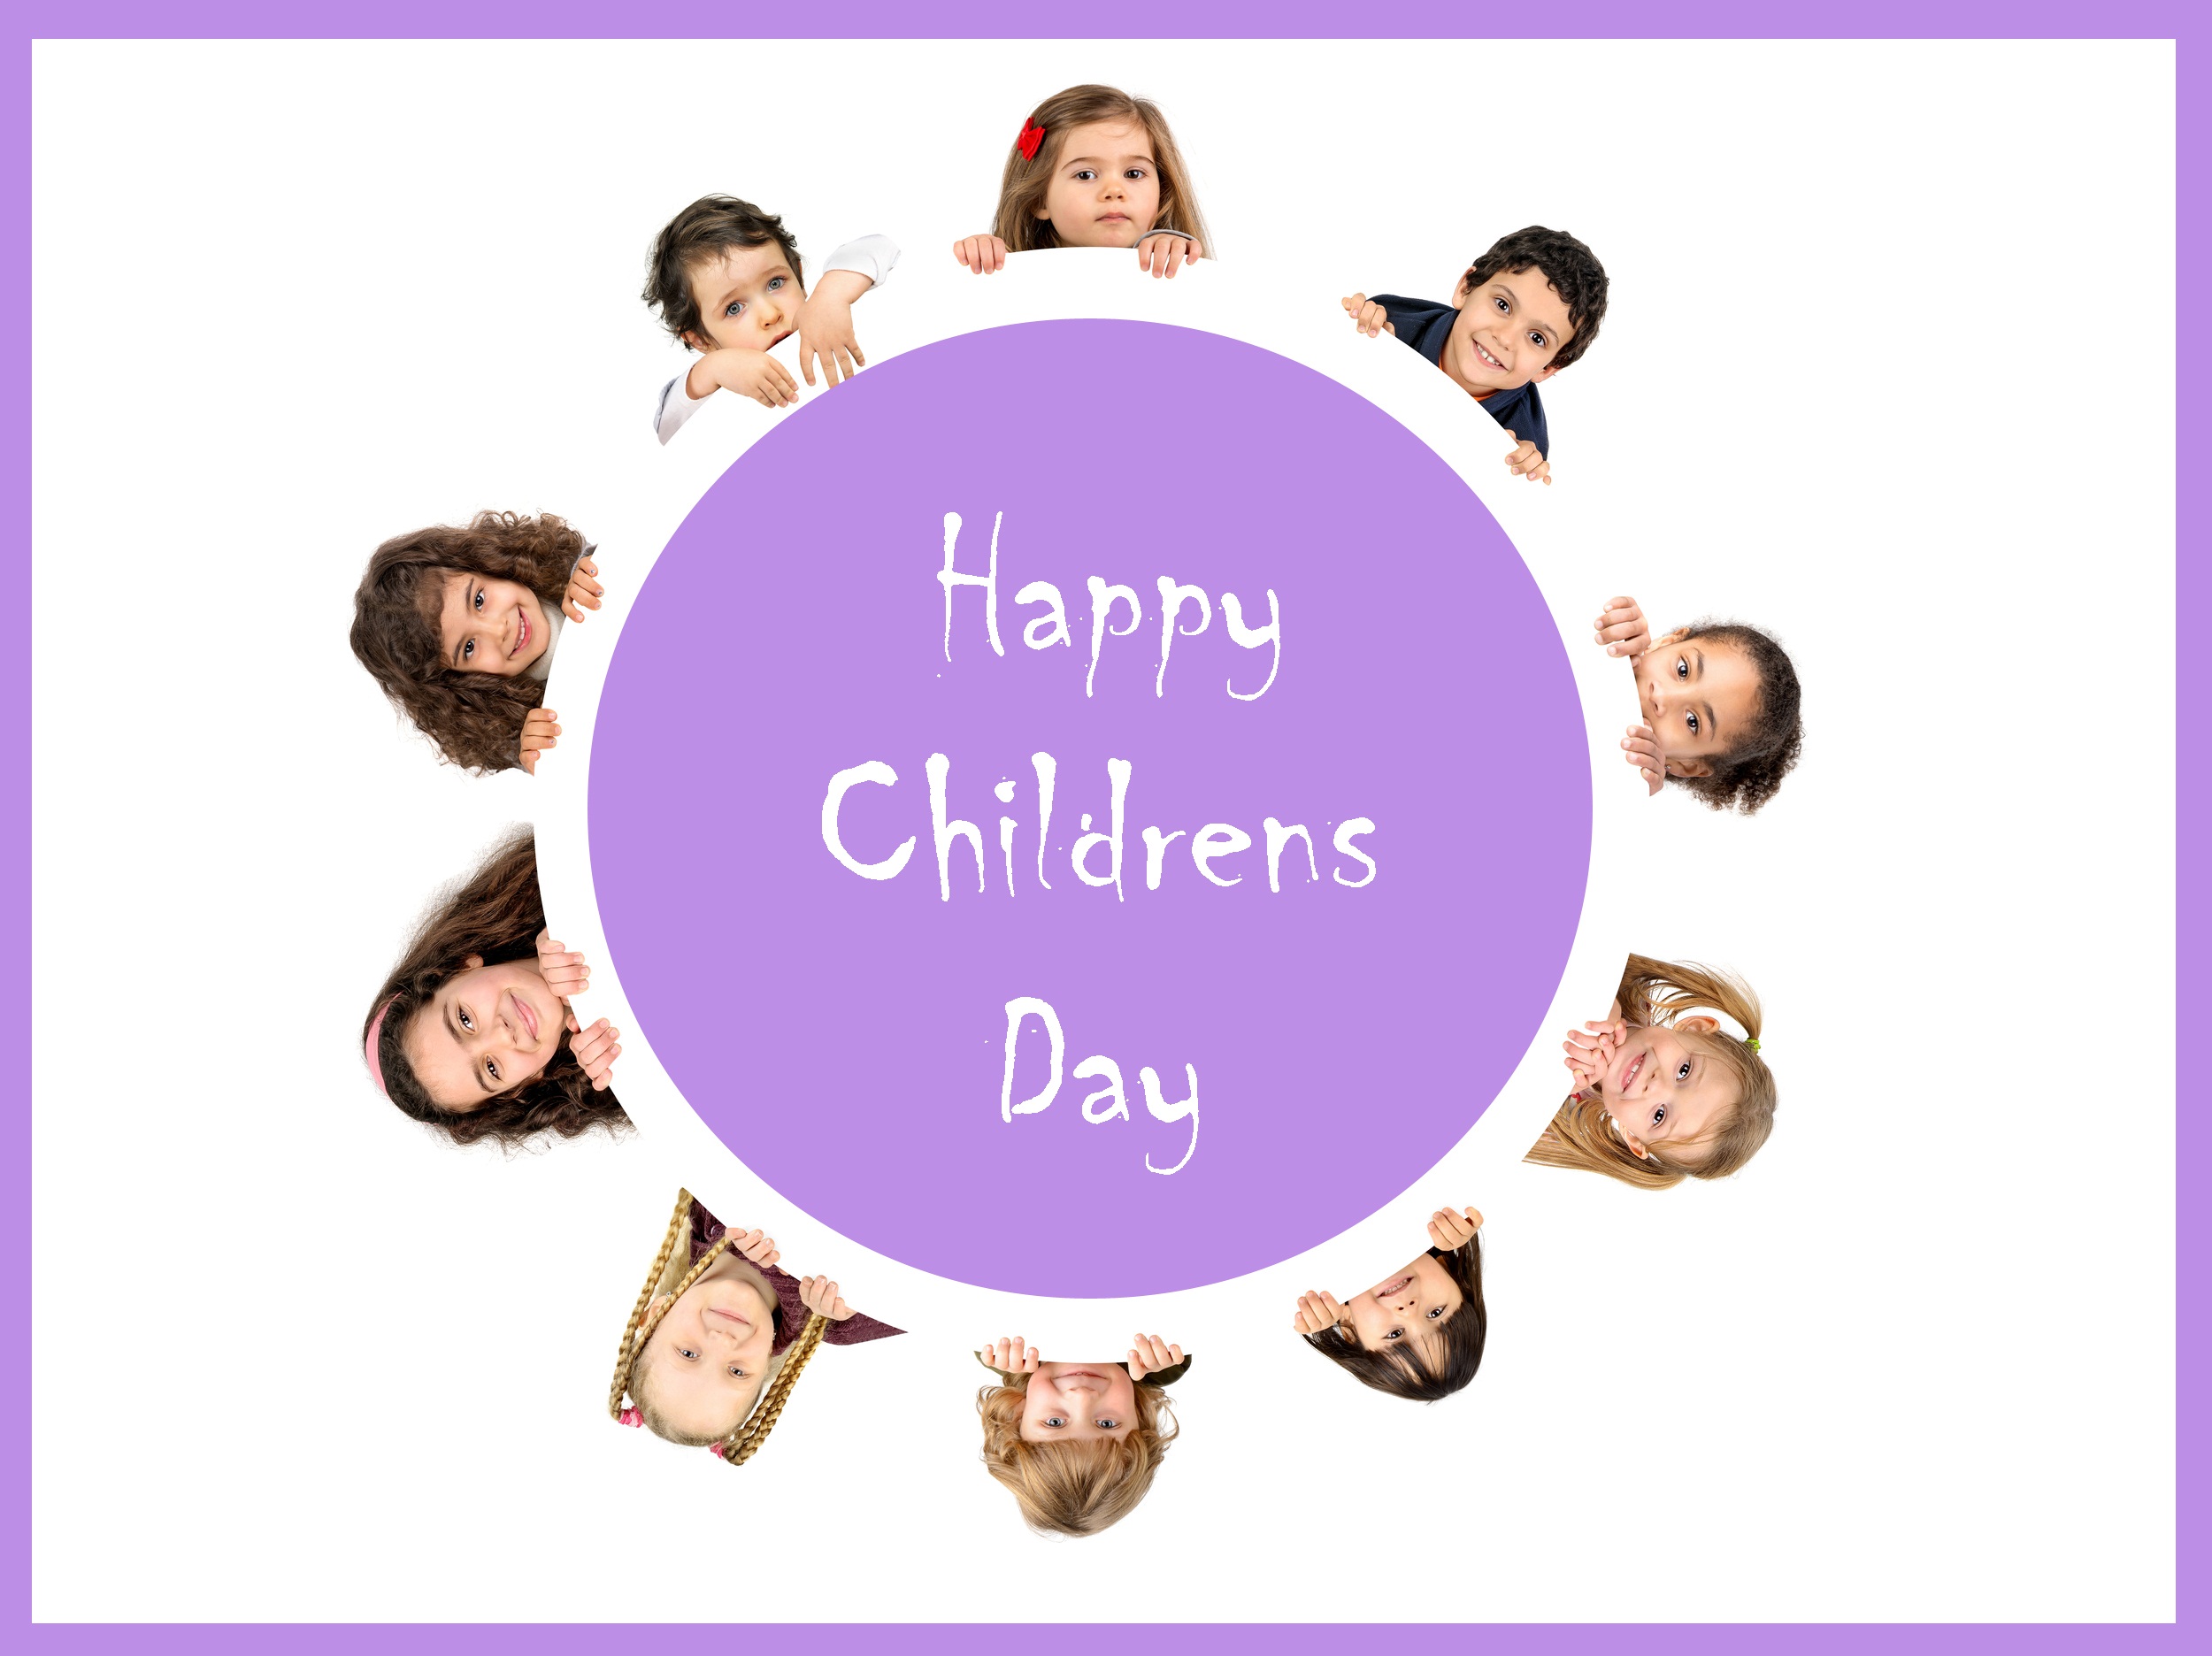 Happy Children's Day 2020 Images, HD Pictures, Ultra-HD Wallpapers, 4K  Photos, And High-Resolution Photographs For WhatsApp Status, Instagram  Story, And Facebook Stories